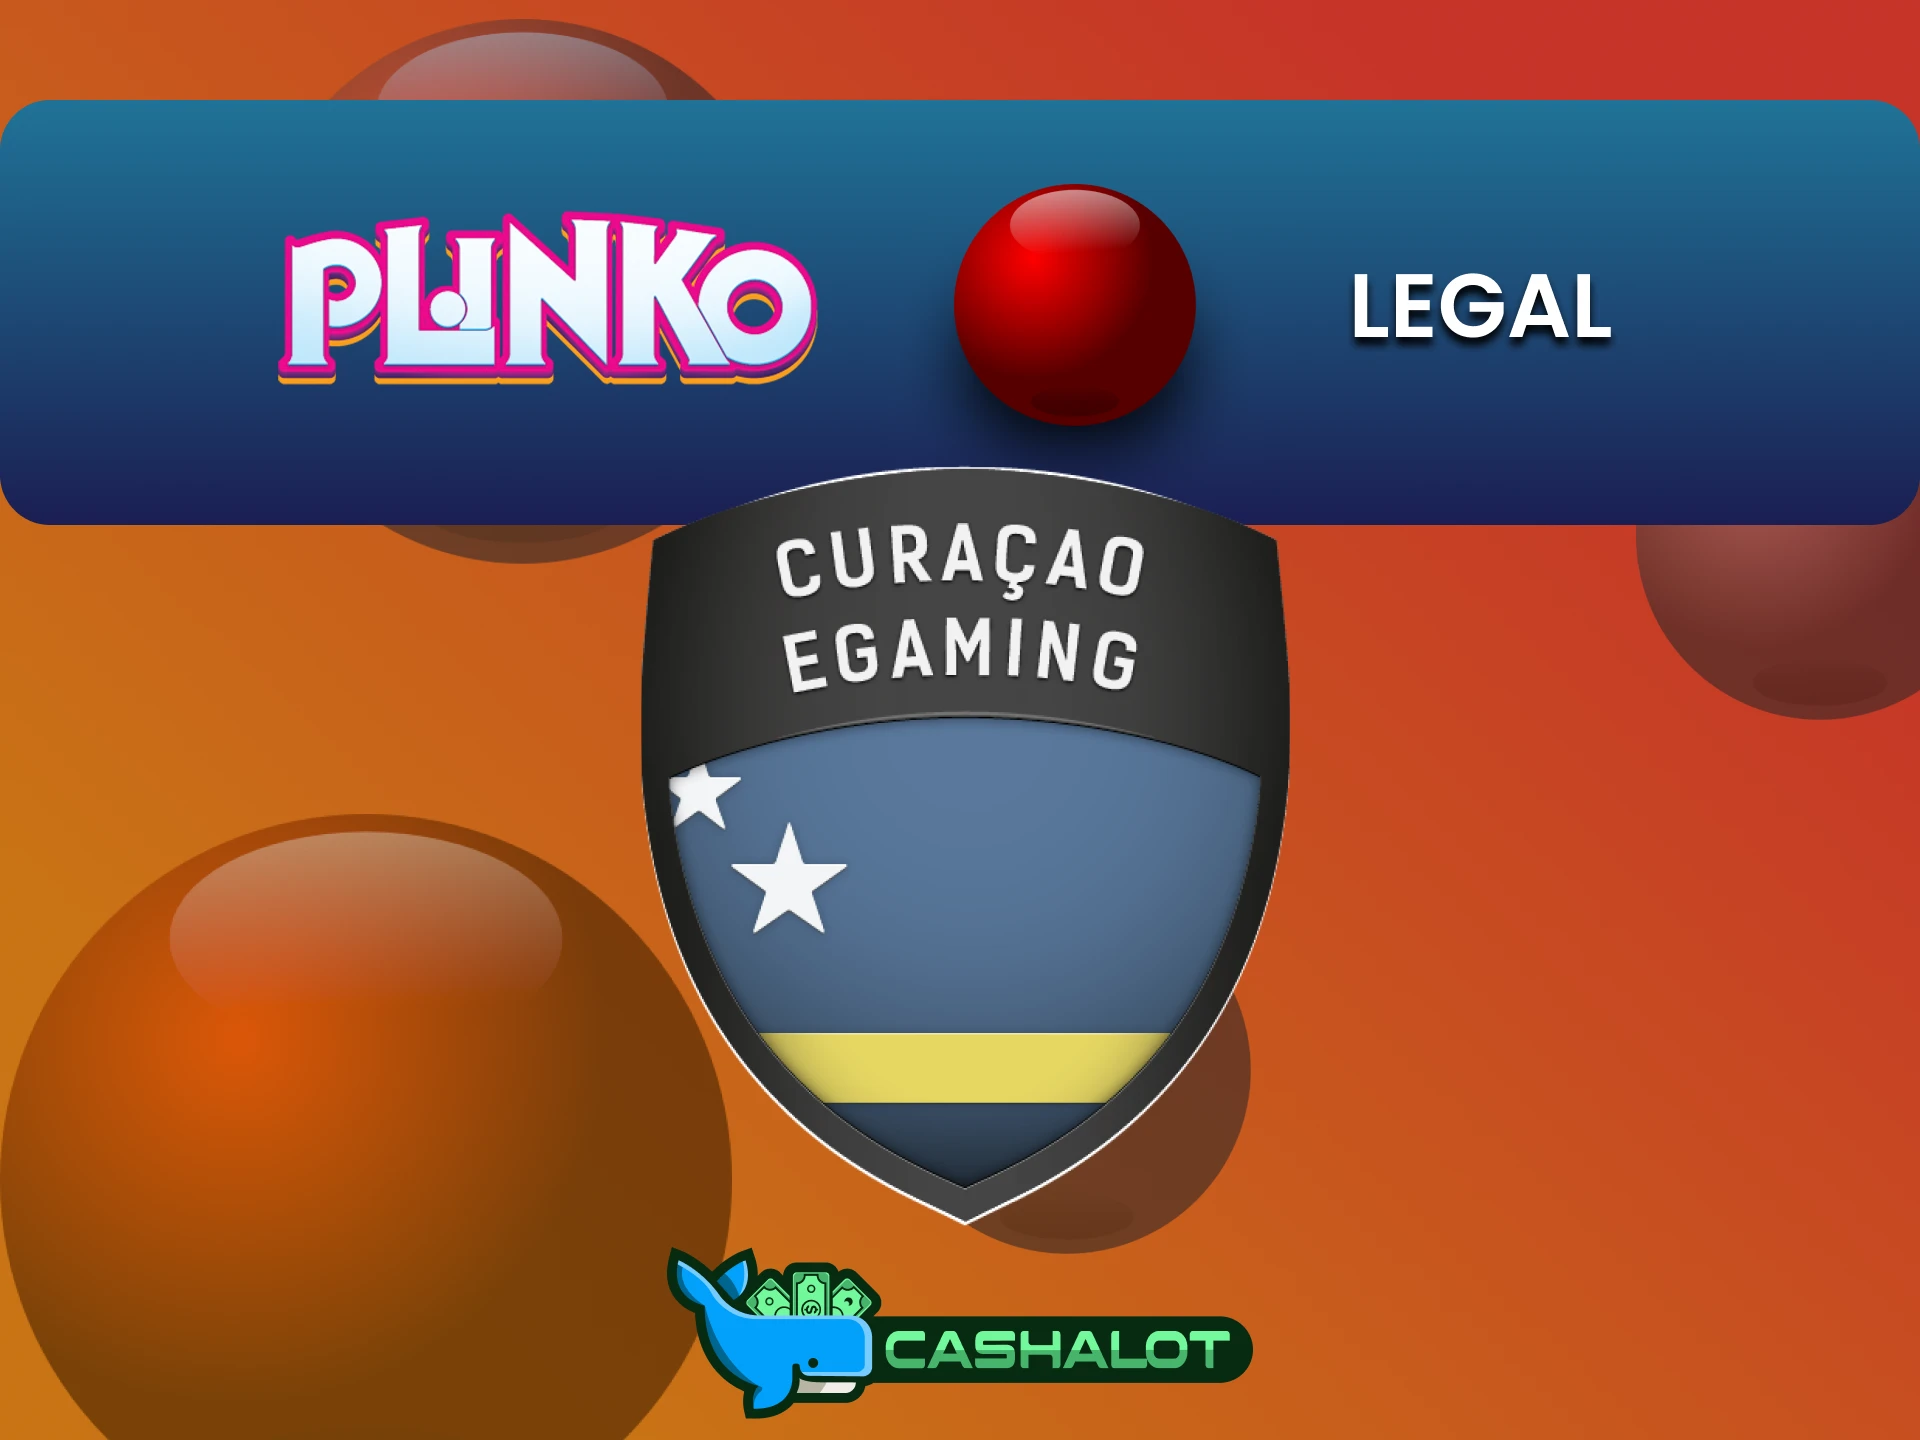 Cashalot is legal for Plinko users.